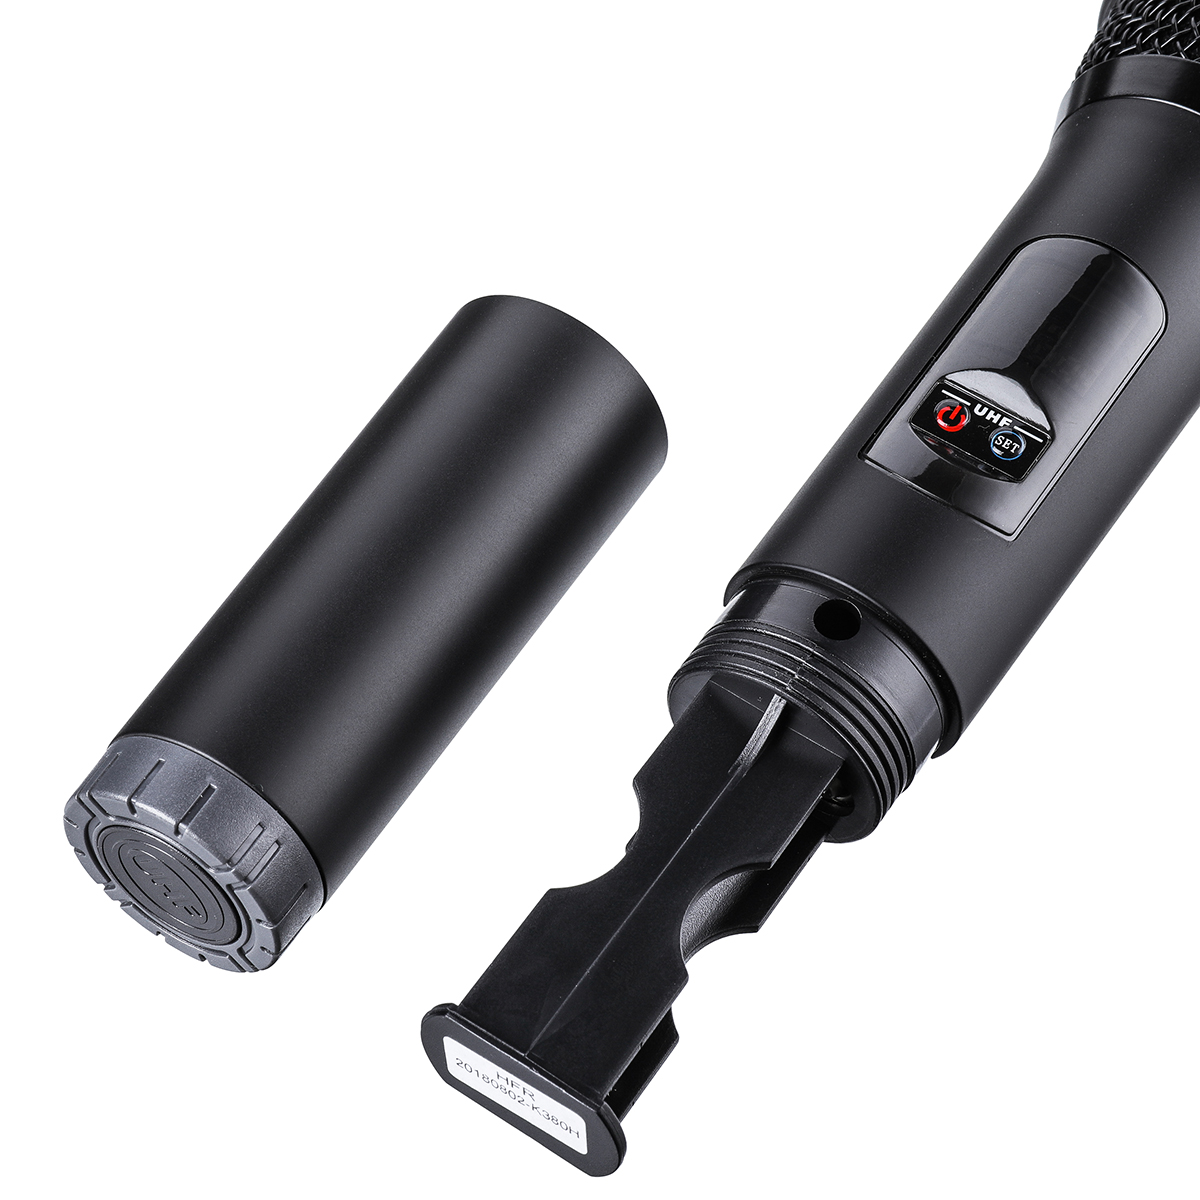 Find ELEGIANT Wireless UHF Handheld Microphone for Home Karaoke Singing for Sale on Gipsybee.com with cryptocurrencies